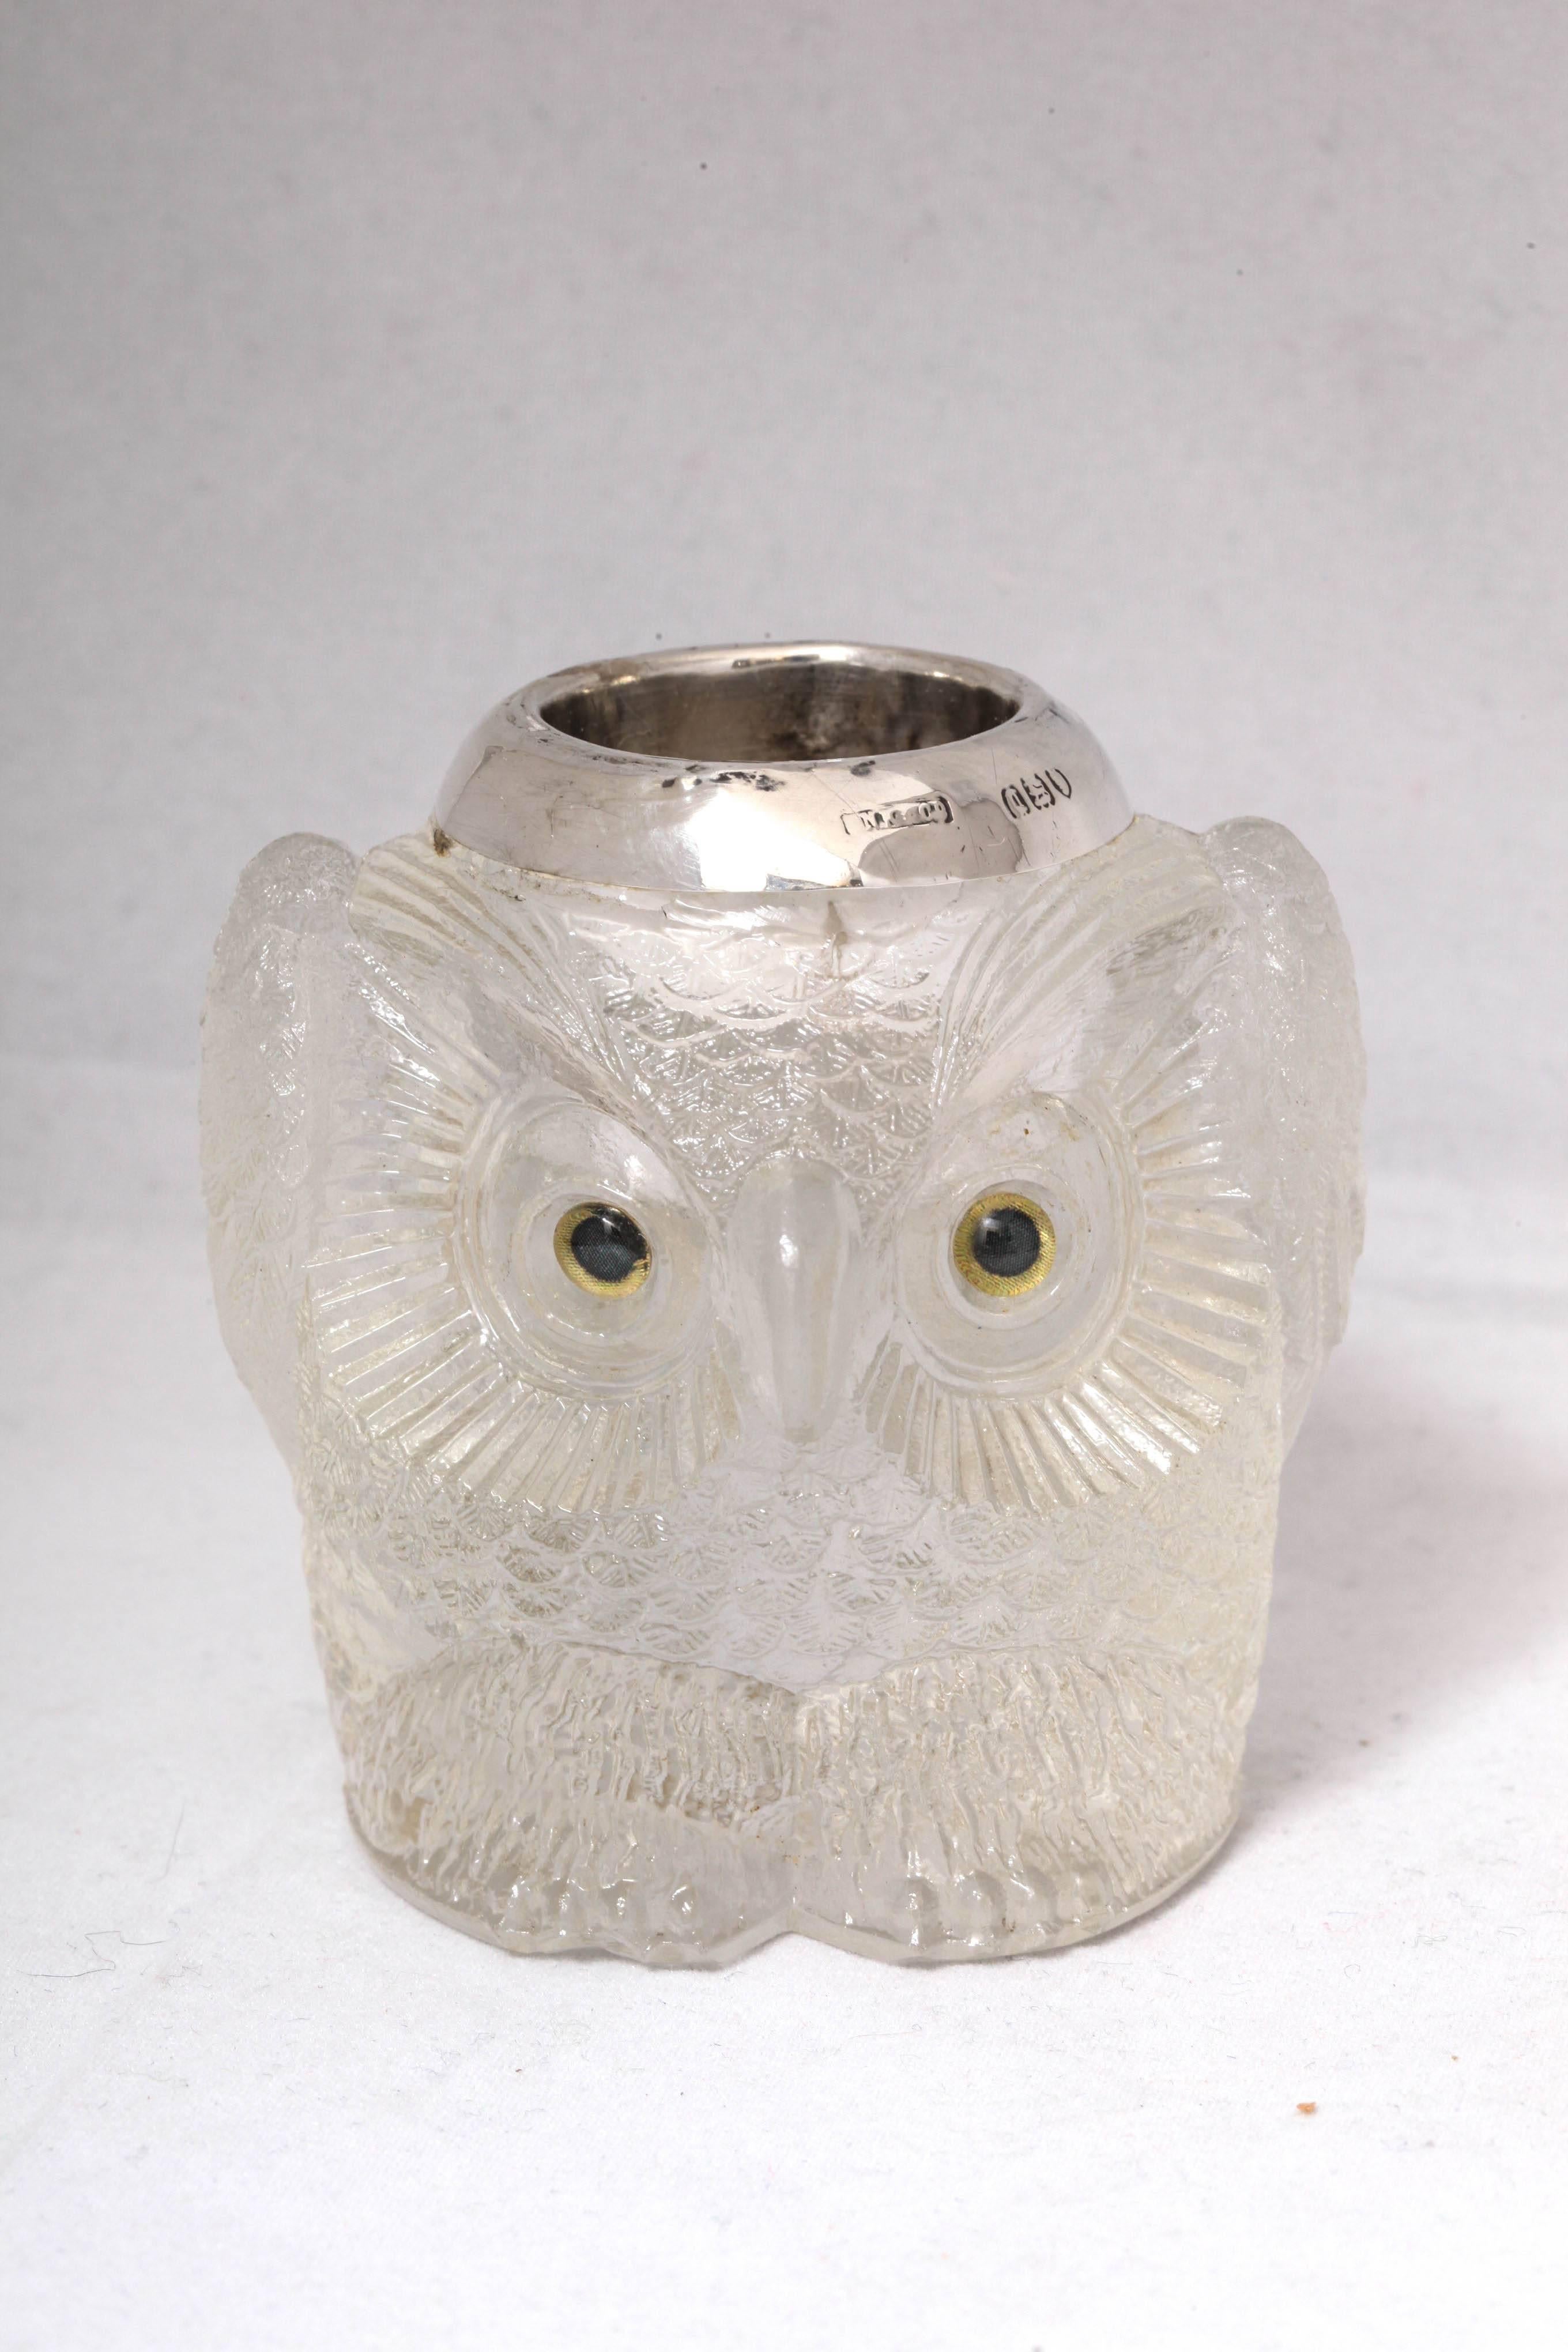 Rare and Unusual Edwardian Sterling Silver-Mounted Owl Form Match Striker 3